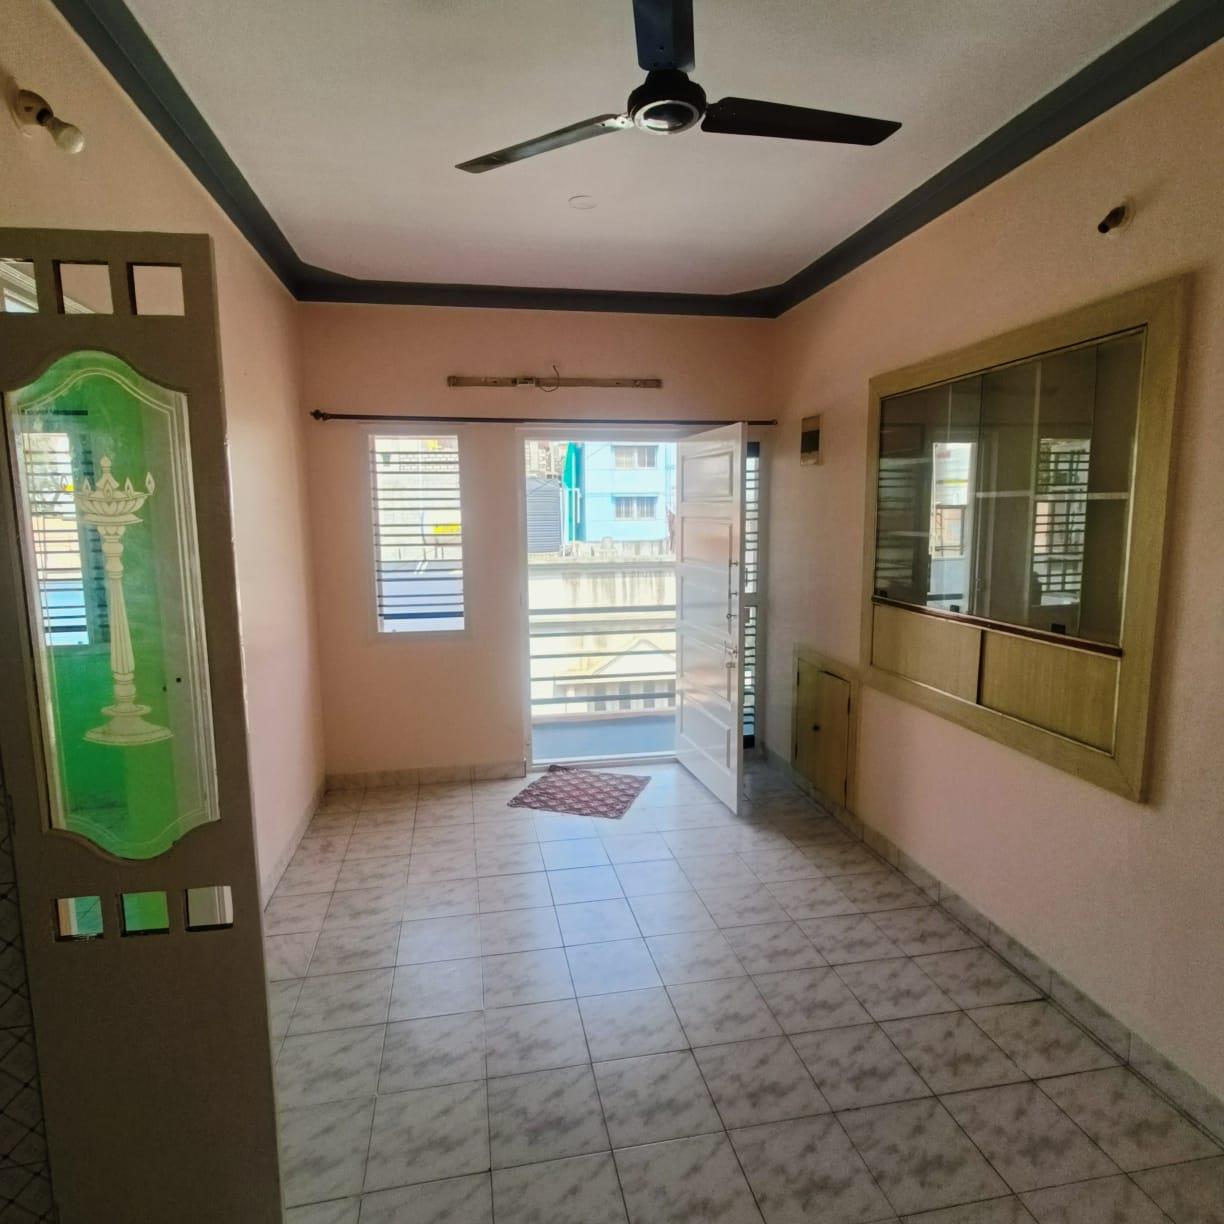 2 BHK Independent House for Lease Only at JAML2 - 1274 in Jakkur